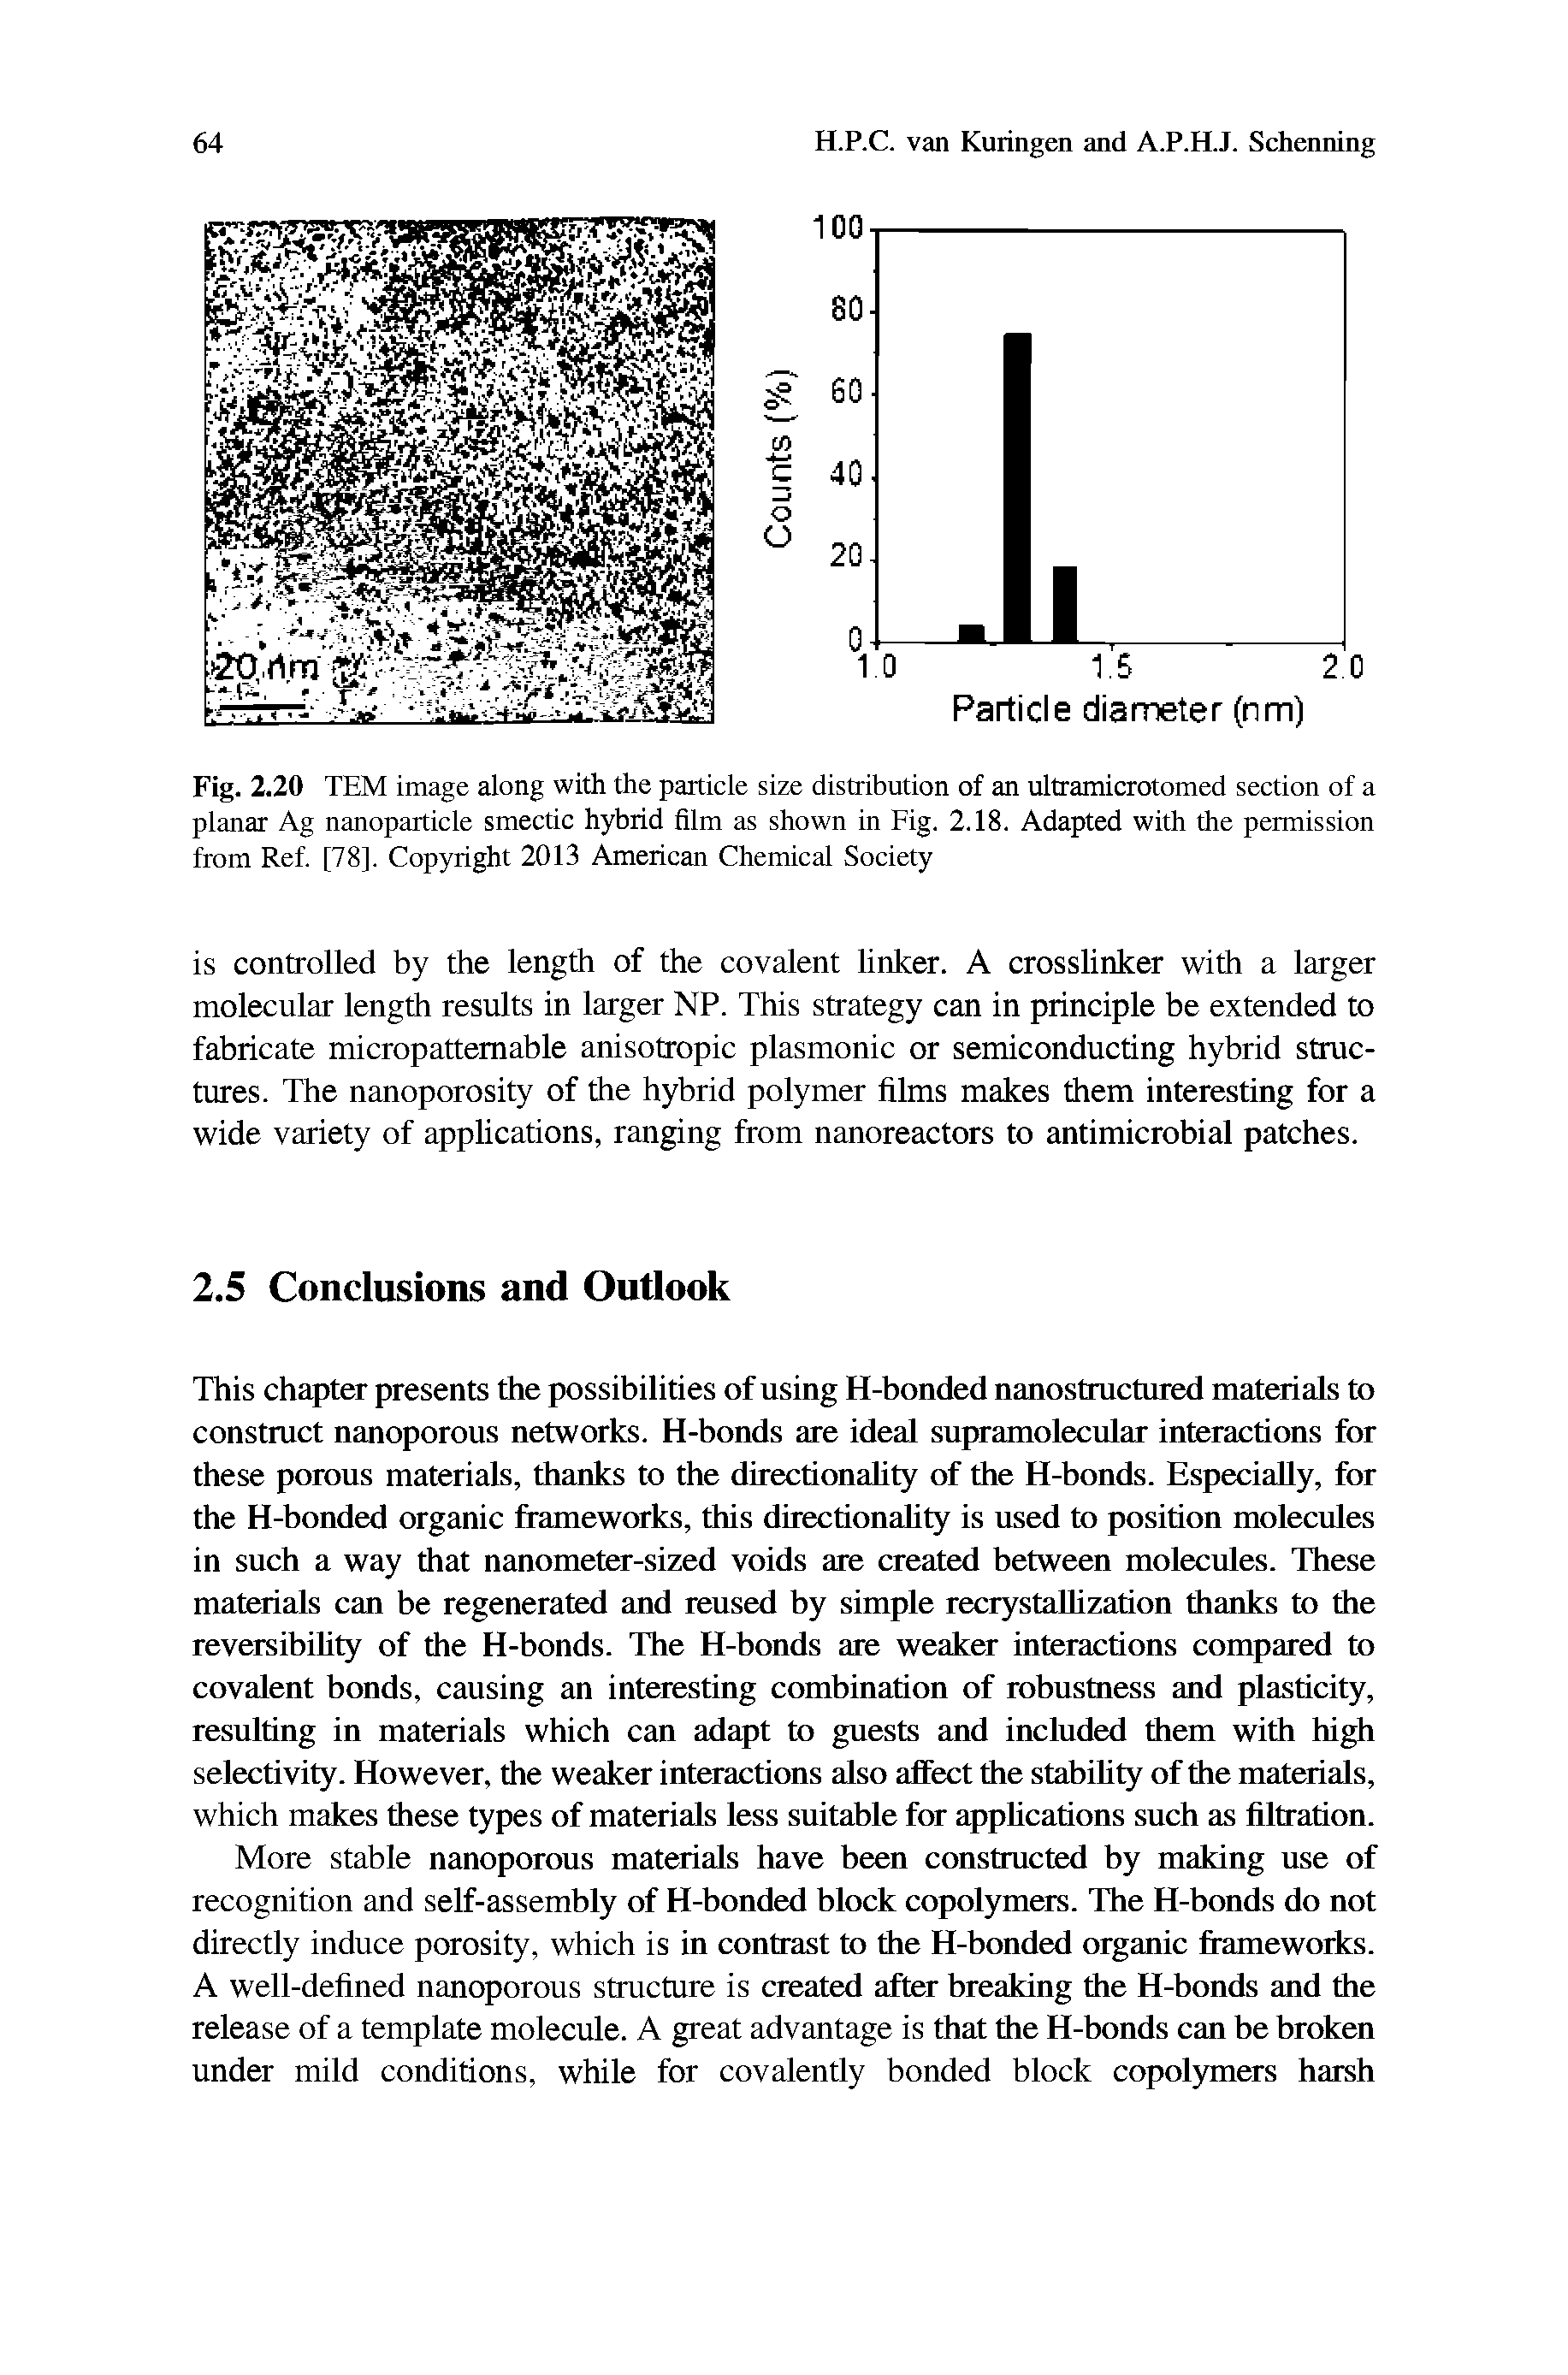 Fig. 2.20 TEM image along with the particle size distribution of an ultramicrotomed section of a planar Ag nanoparticle smectic hybrid film as shown in Fig. 2.18. Adapted with the permission from Ref [78]. Cop5uight 2013 American Chemical Society...